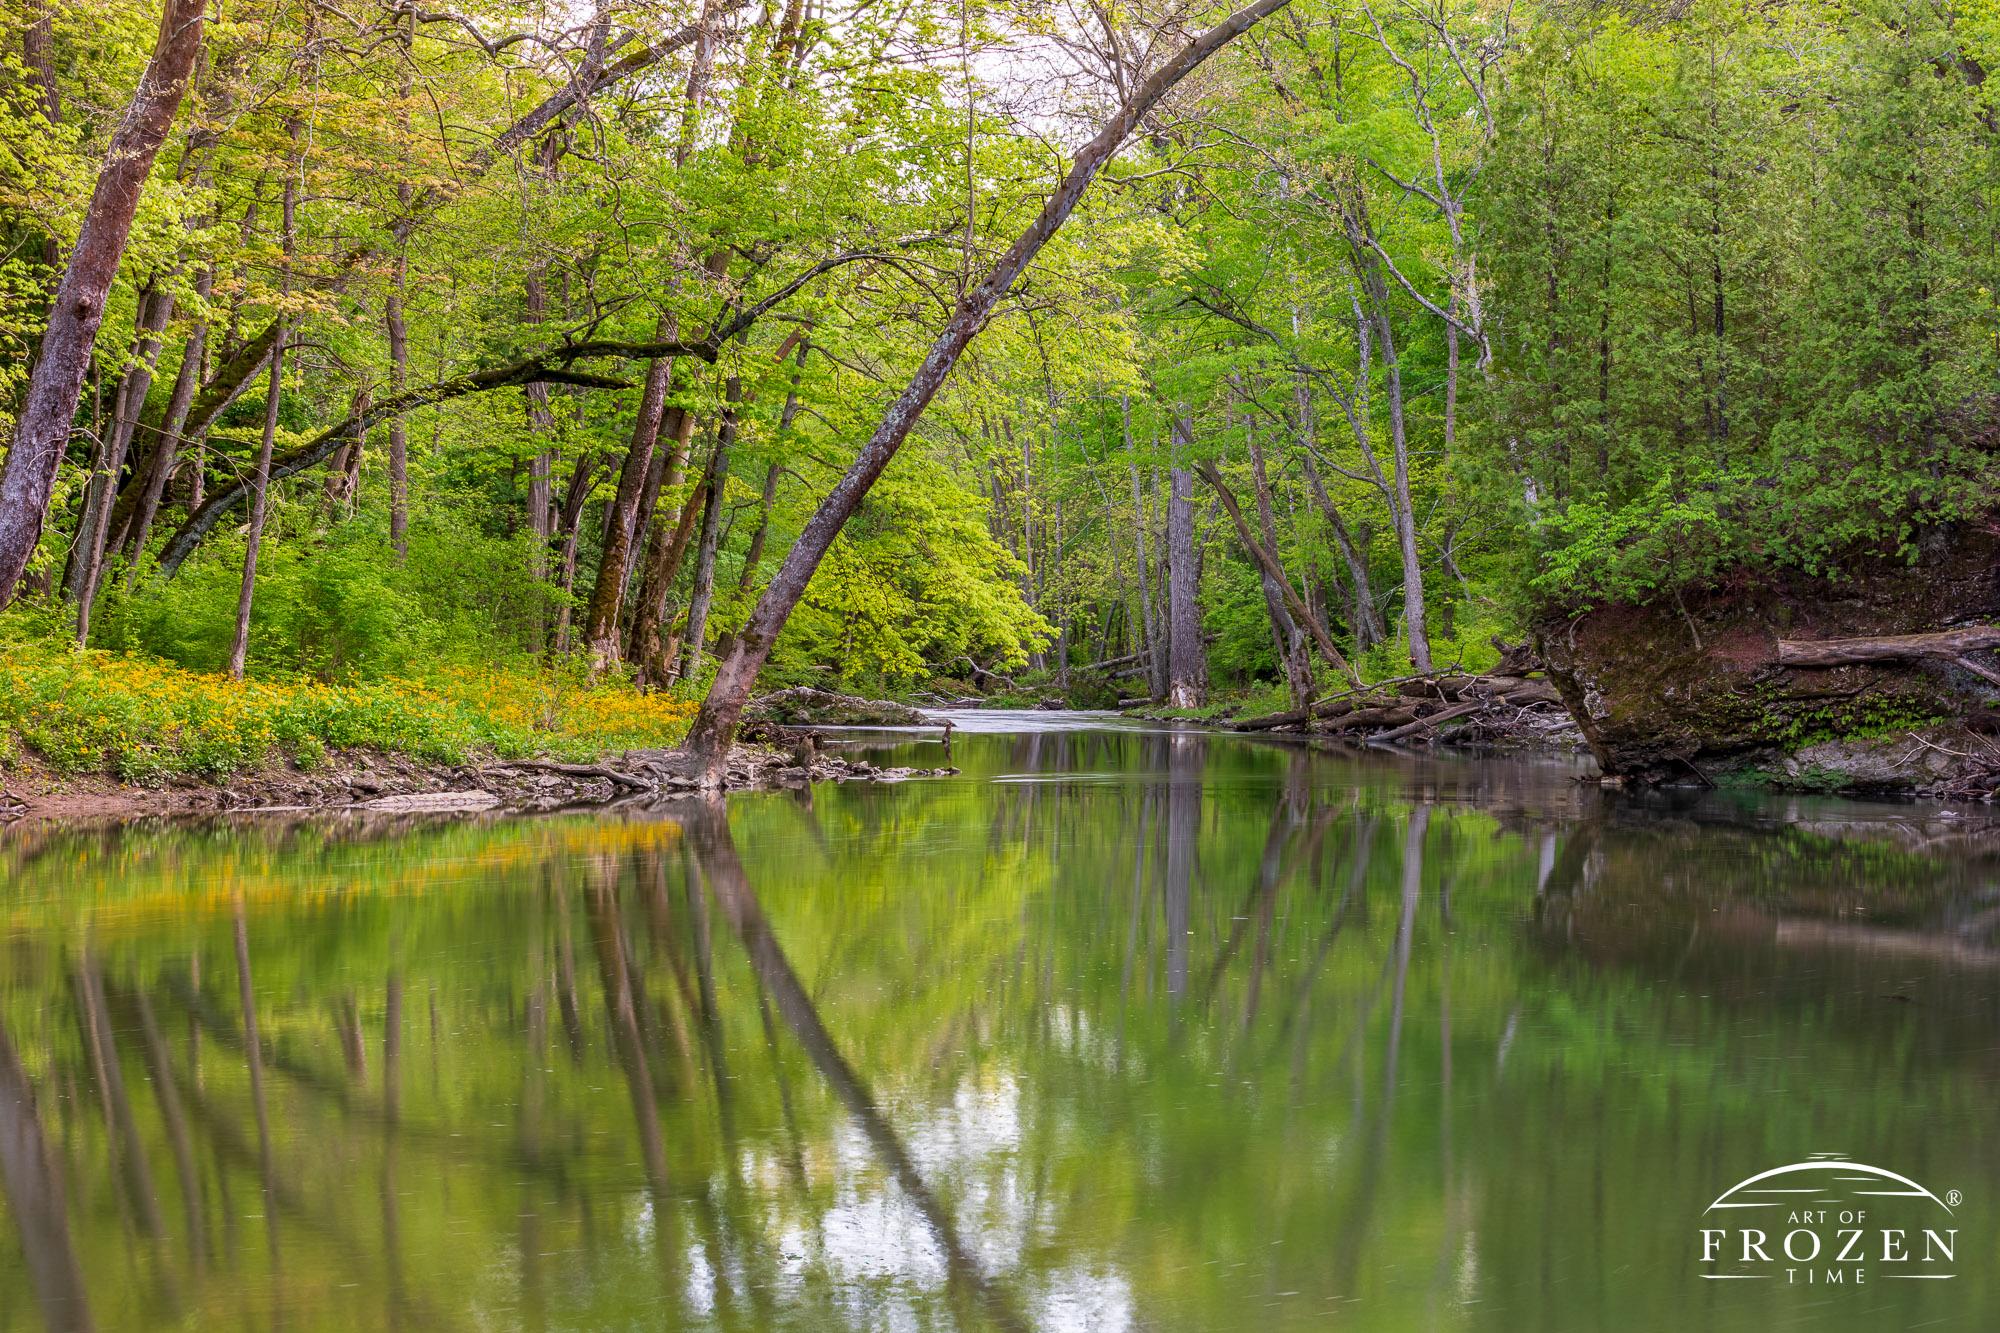 A springtime view of Clifton Gorge’s Blue Hole where the turbulent river briefly calms in a peaceful pool